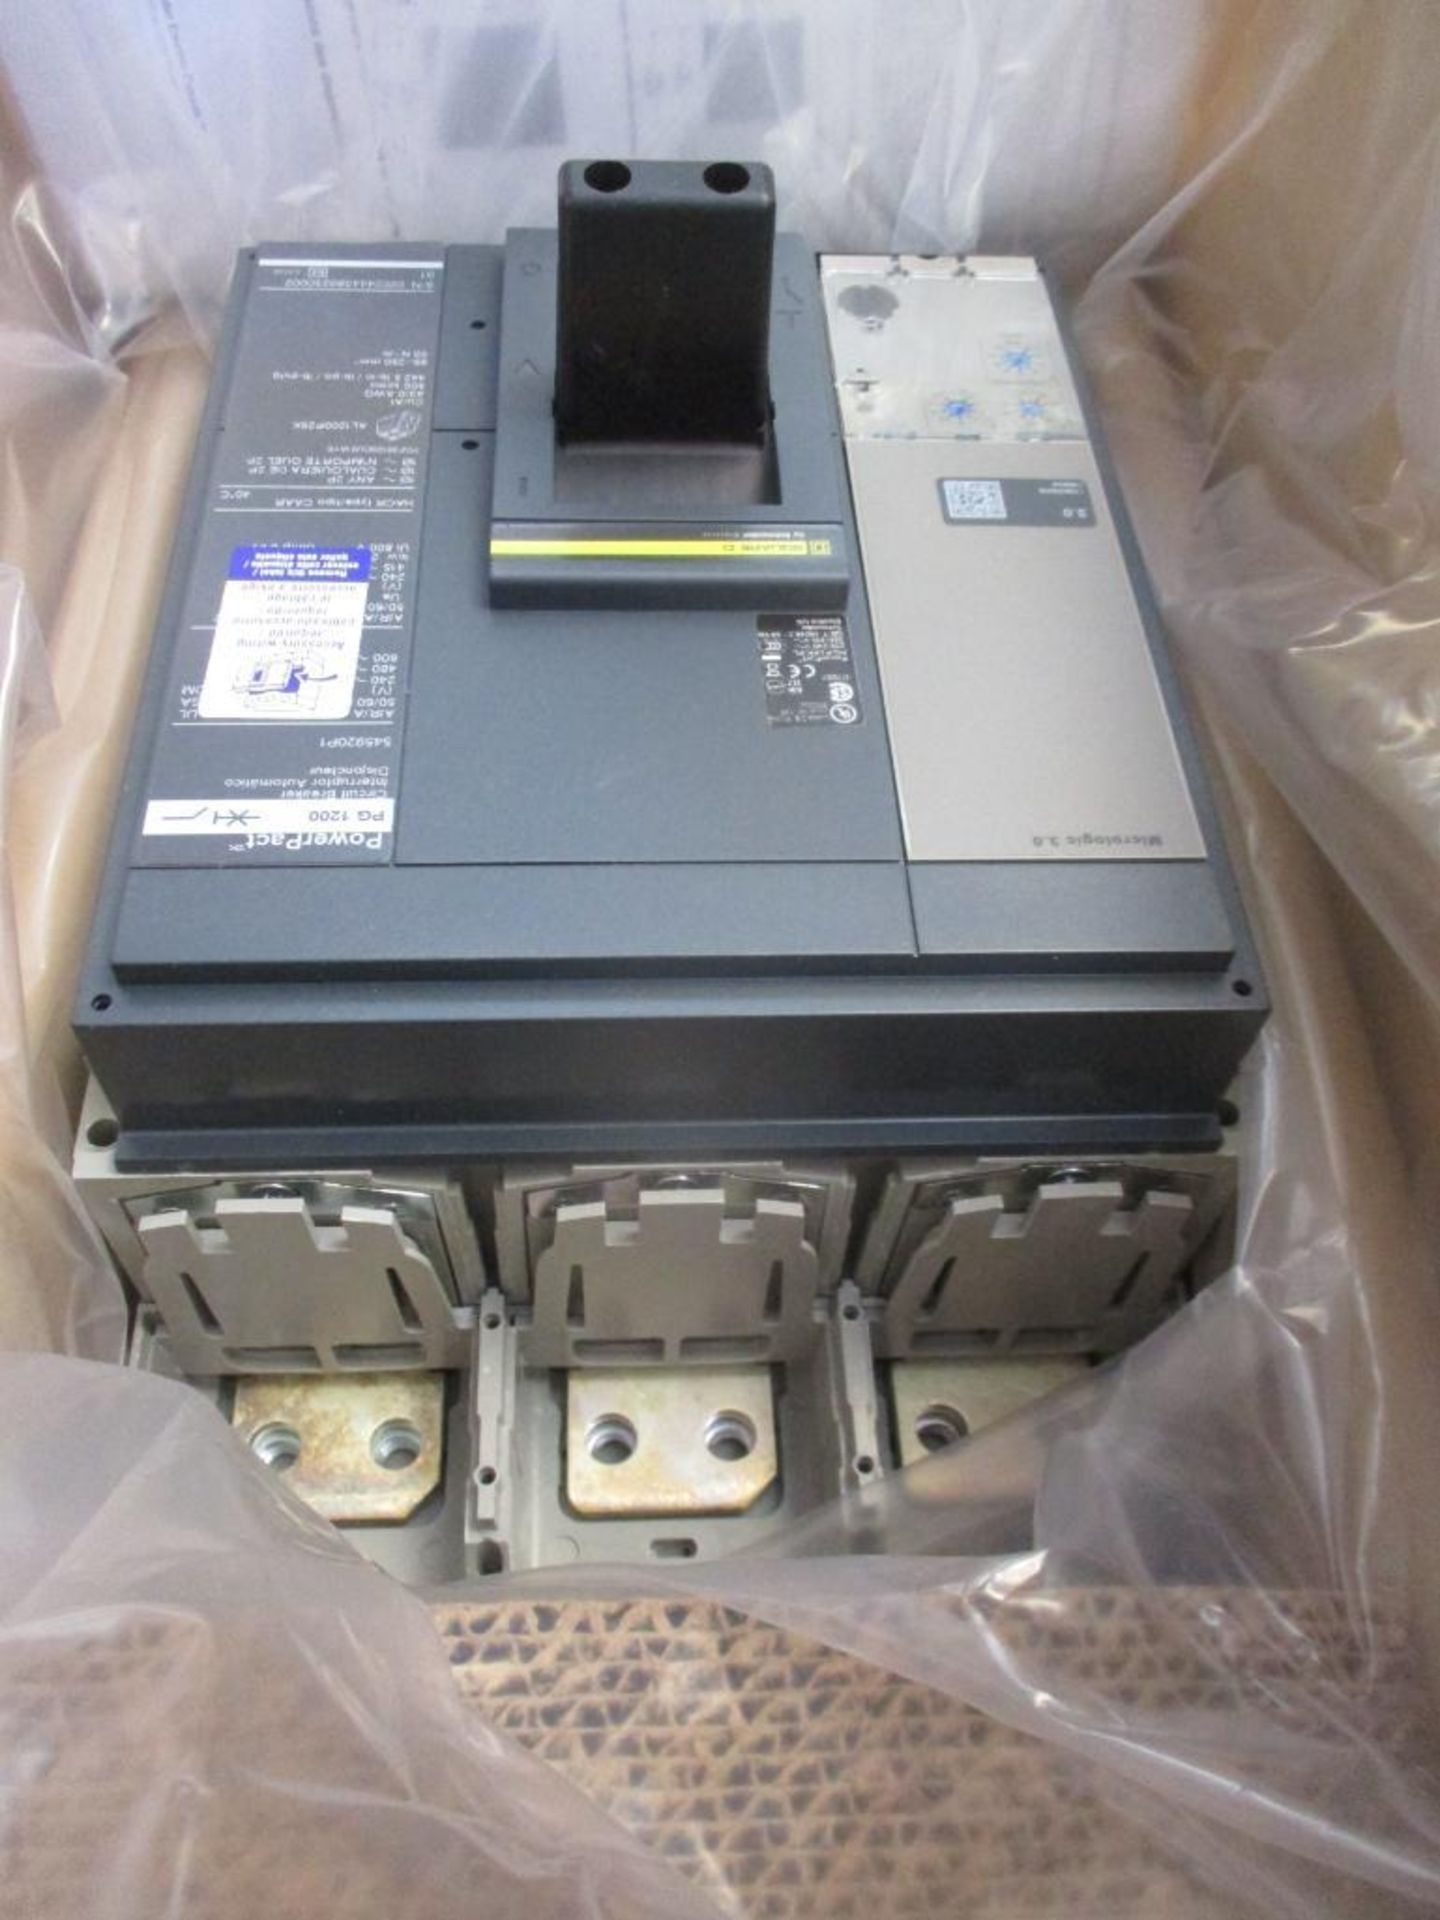 Square D 1200 AMP Circuit Breaker, 545920P1, 1200A, 3P, 600VAC, PG1200 (New in Box) - Image 3 of 4